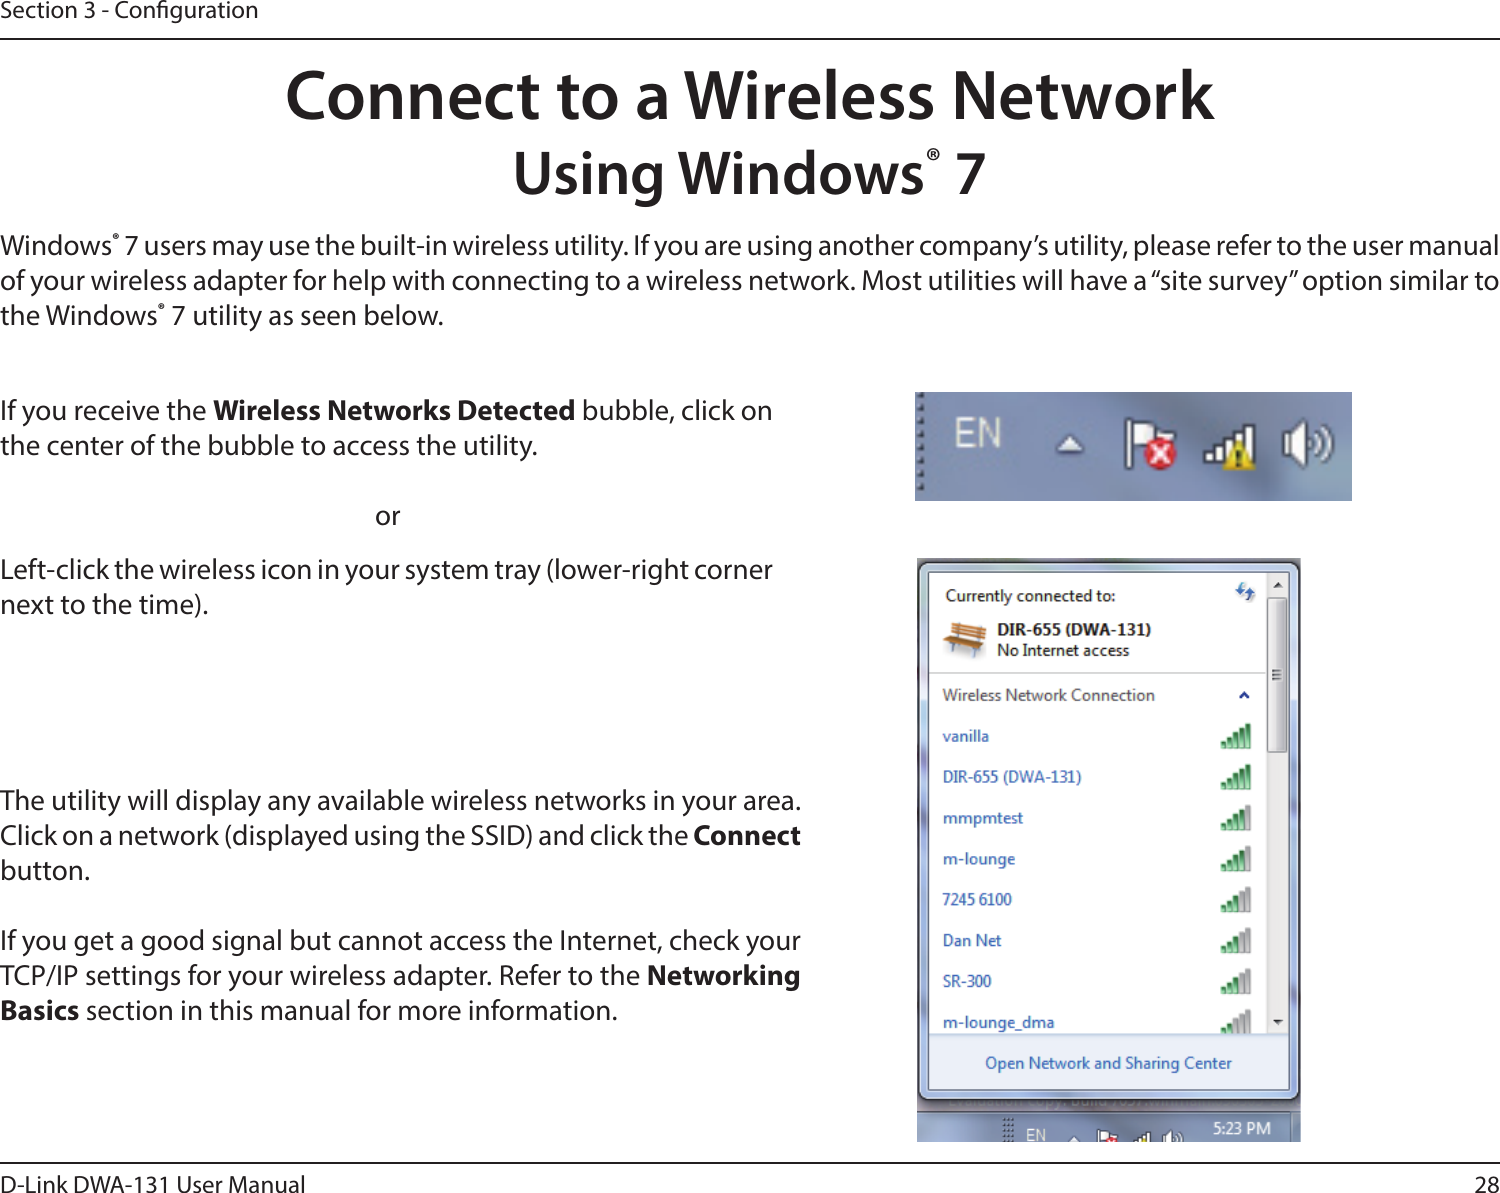 28D-Link DWA-131 User ManualSection 3 - CongurationConnect to a Wireless NetworkUsing Windows® 7Windows® 7 users may use the built-in wireless utility. If you are using another company’s utility, please refer to the user manual of your wireless adapter for help with connecting to a wireless network. Most utilities will have a “site survey” option similar to the Windows® 7 utility as seen below.Left-click the wireless icon in your system tray (lower-right corner next to the time).If you receive the Wireless Networks Detected bubble, click on the center of the bubble to access the utility.     orThe utility will display any available wireless networks in your area. Click on a network (displayed using the SSID) and click the Connect button.If you get a good signal but cannot access the Internet, check your TCP/IP settings for your wireless adapter. Refer to the Networking Basics section in this manual for more information.